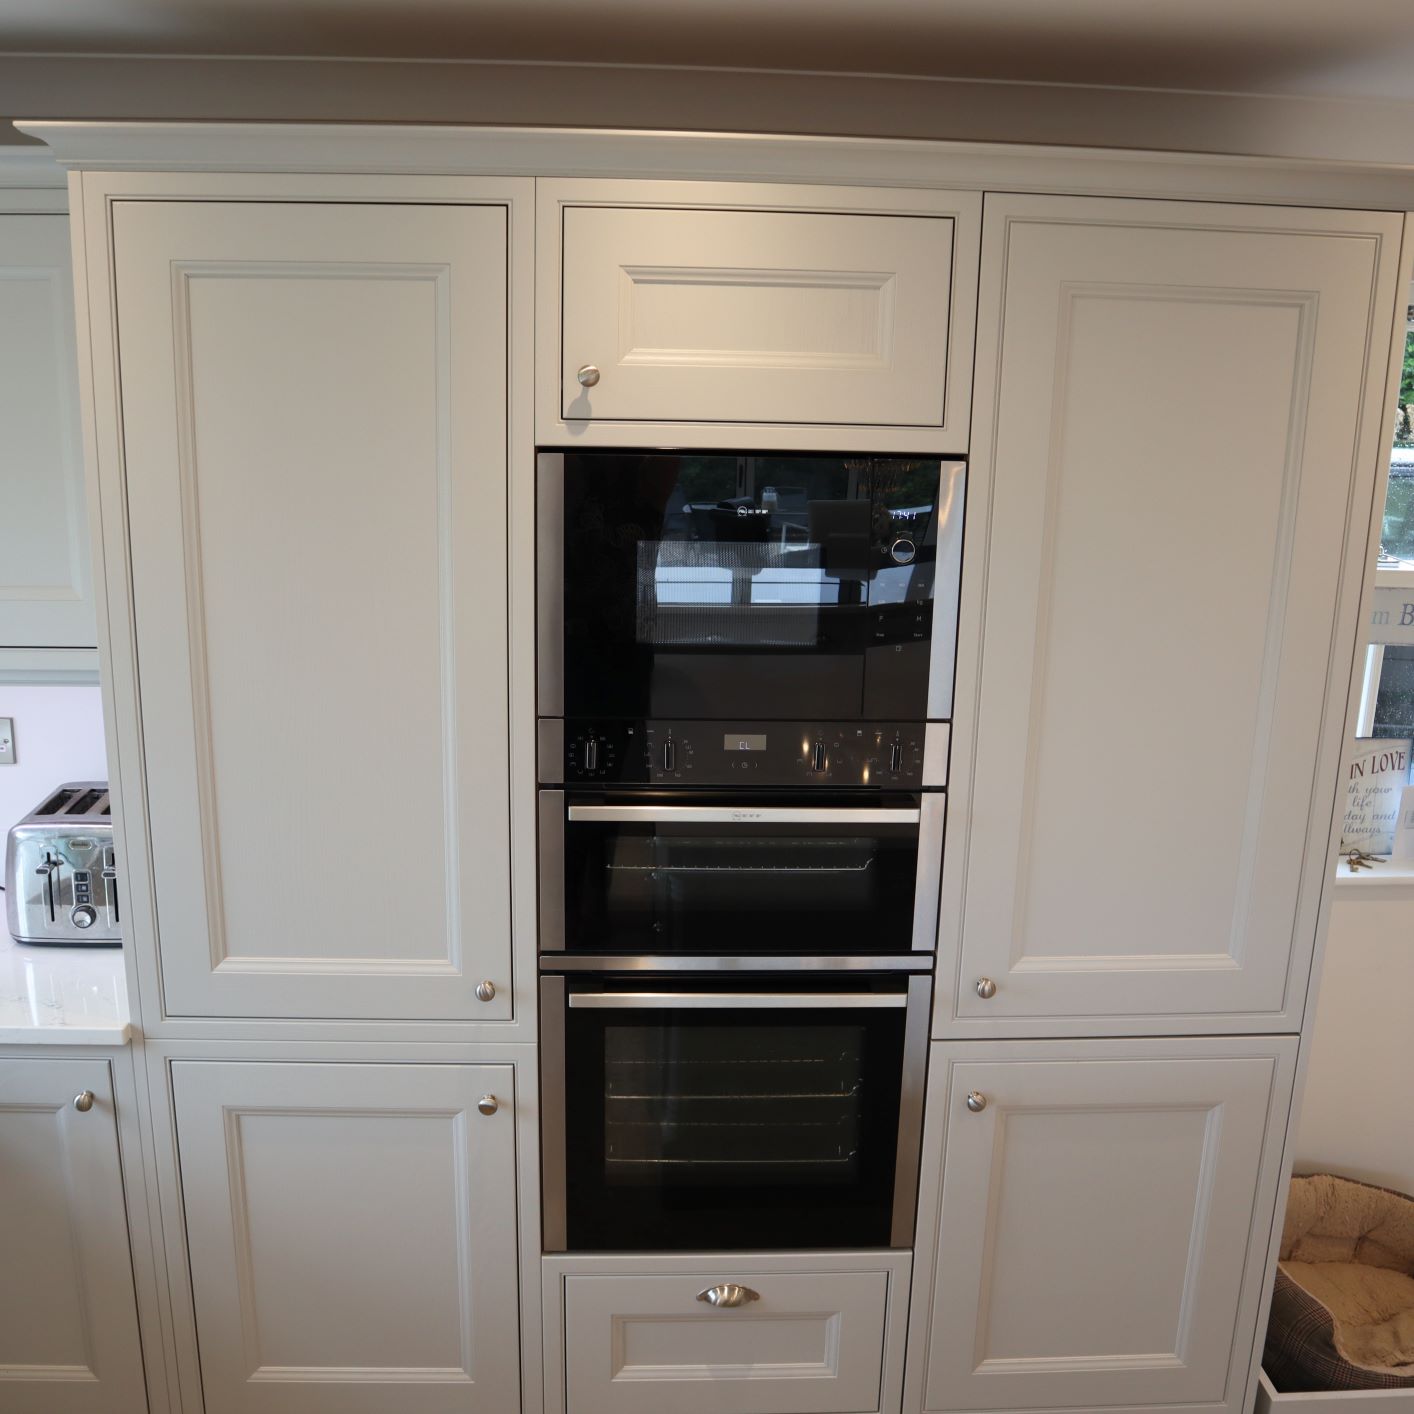 Thwaite in Light Grey Tall Larders & Built In Oven & Microwave